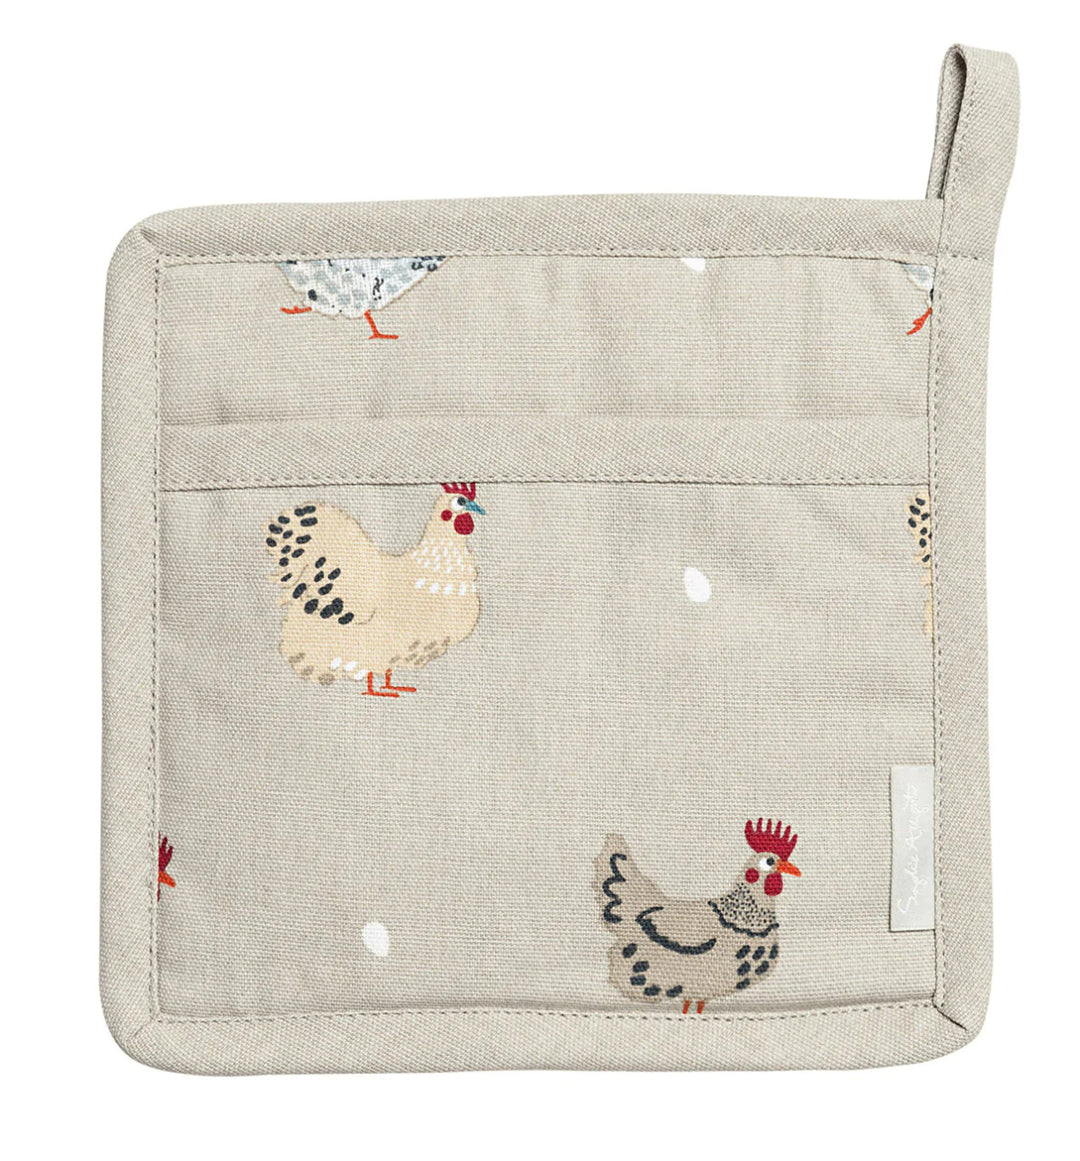 Lay a Little Egg Pot Grab by Sophie Allport